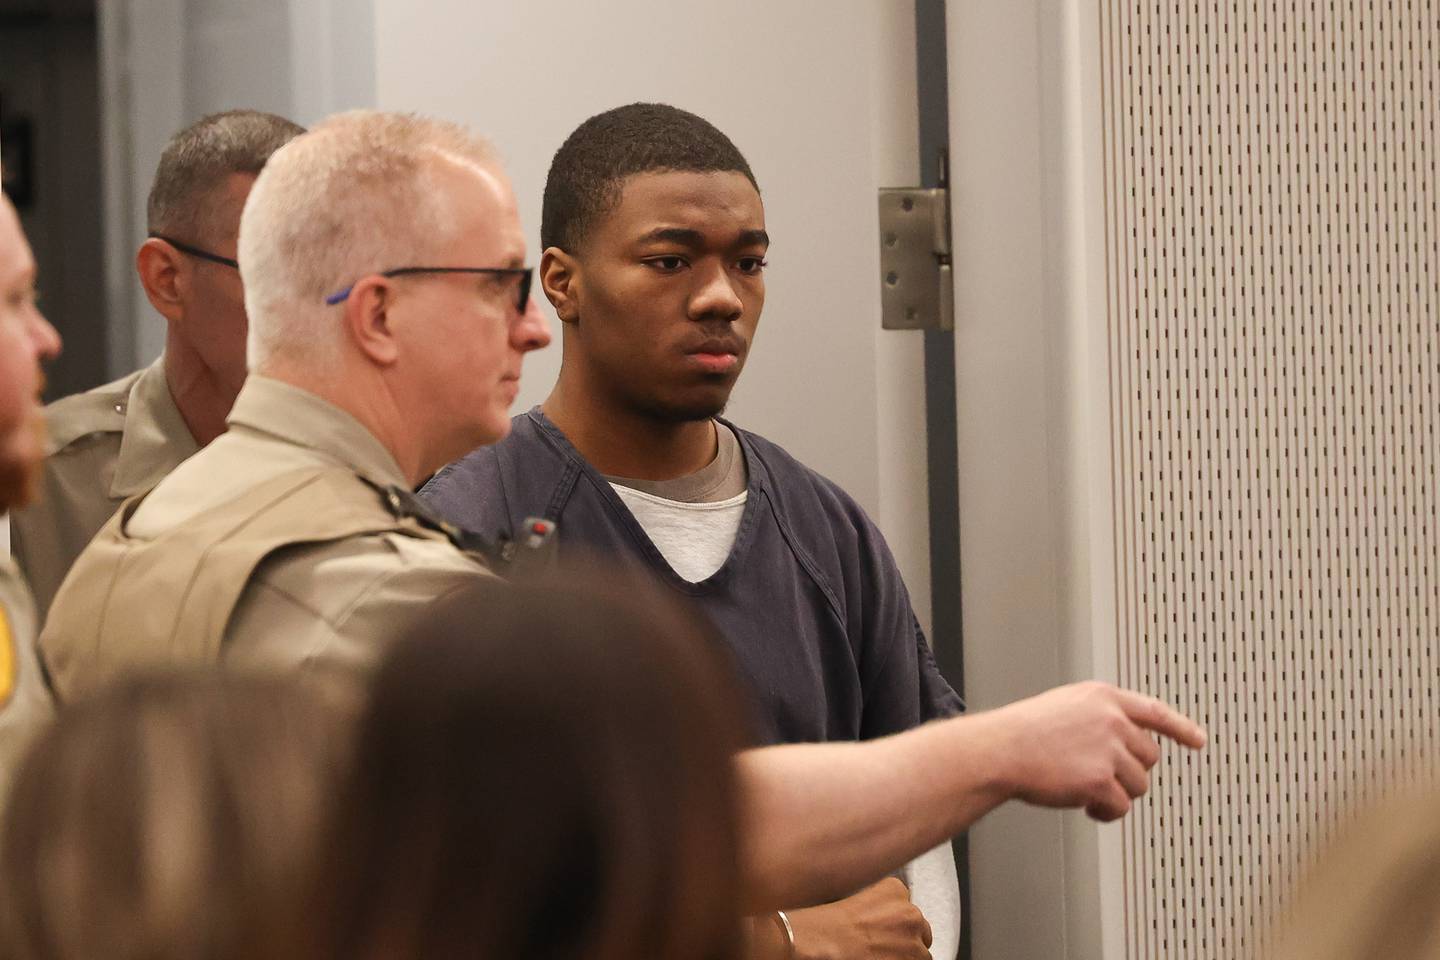 Byrion Montgomery, 17, of Bolingbrook, is directed into the courtroom for a hearing at the Will County Courthouse on Thursday, March 30, 2023 in Joliet. Montgomery is accused of the murders of Cartez Daniels, 40, Samiya Shelton-Tillman, 17, and Sanai Daniels, 9, at a residence in the 100 block of Lee Lane in Bolingbrook, as well as attempted first-degree murder of Tania Stewart.